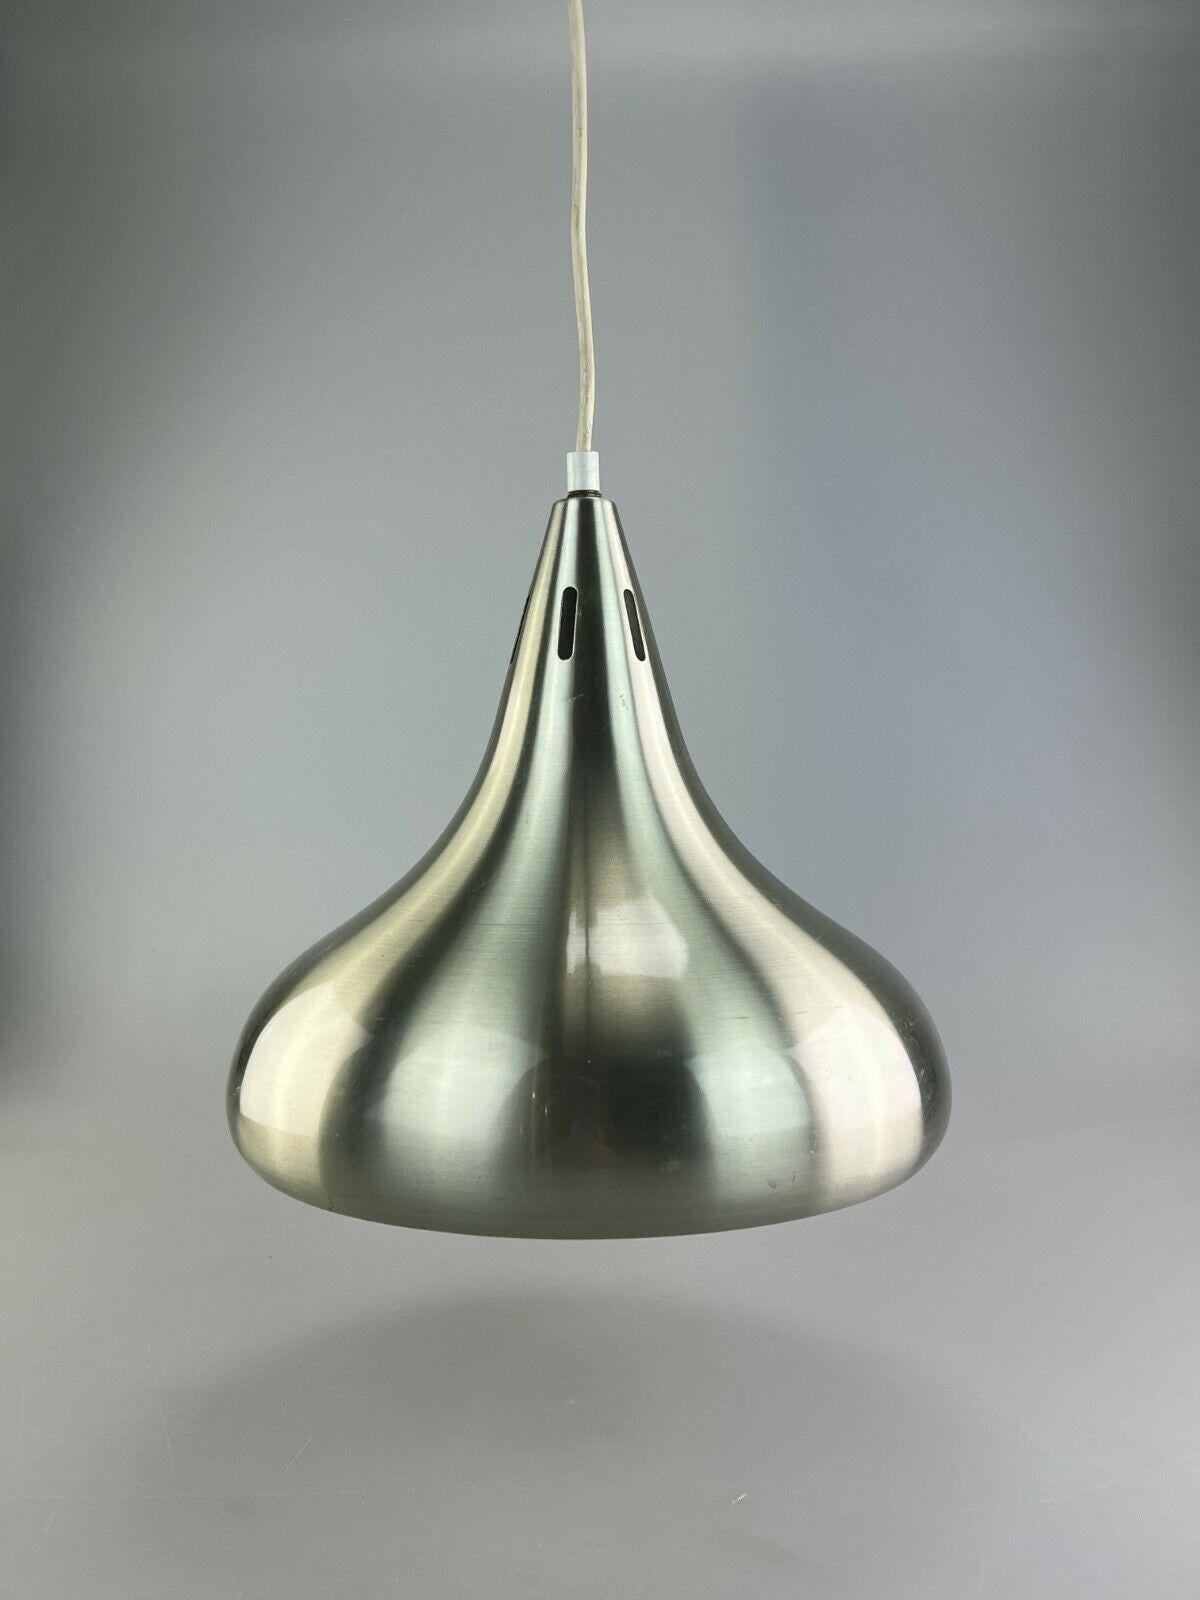 60s 70s lamp light ceiling lamp aluminum space age design 60s 70s

Object: ceiling lamp

Manufacturer:

Condition: vintage

Age: around 1960-1970

Dimensions:

Diameter = 30cm
Height = 30cm

Other notes:

The pictures serve as part